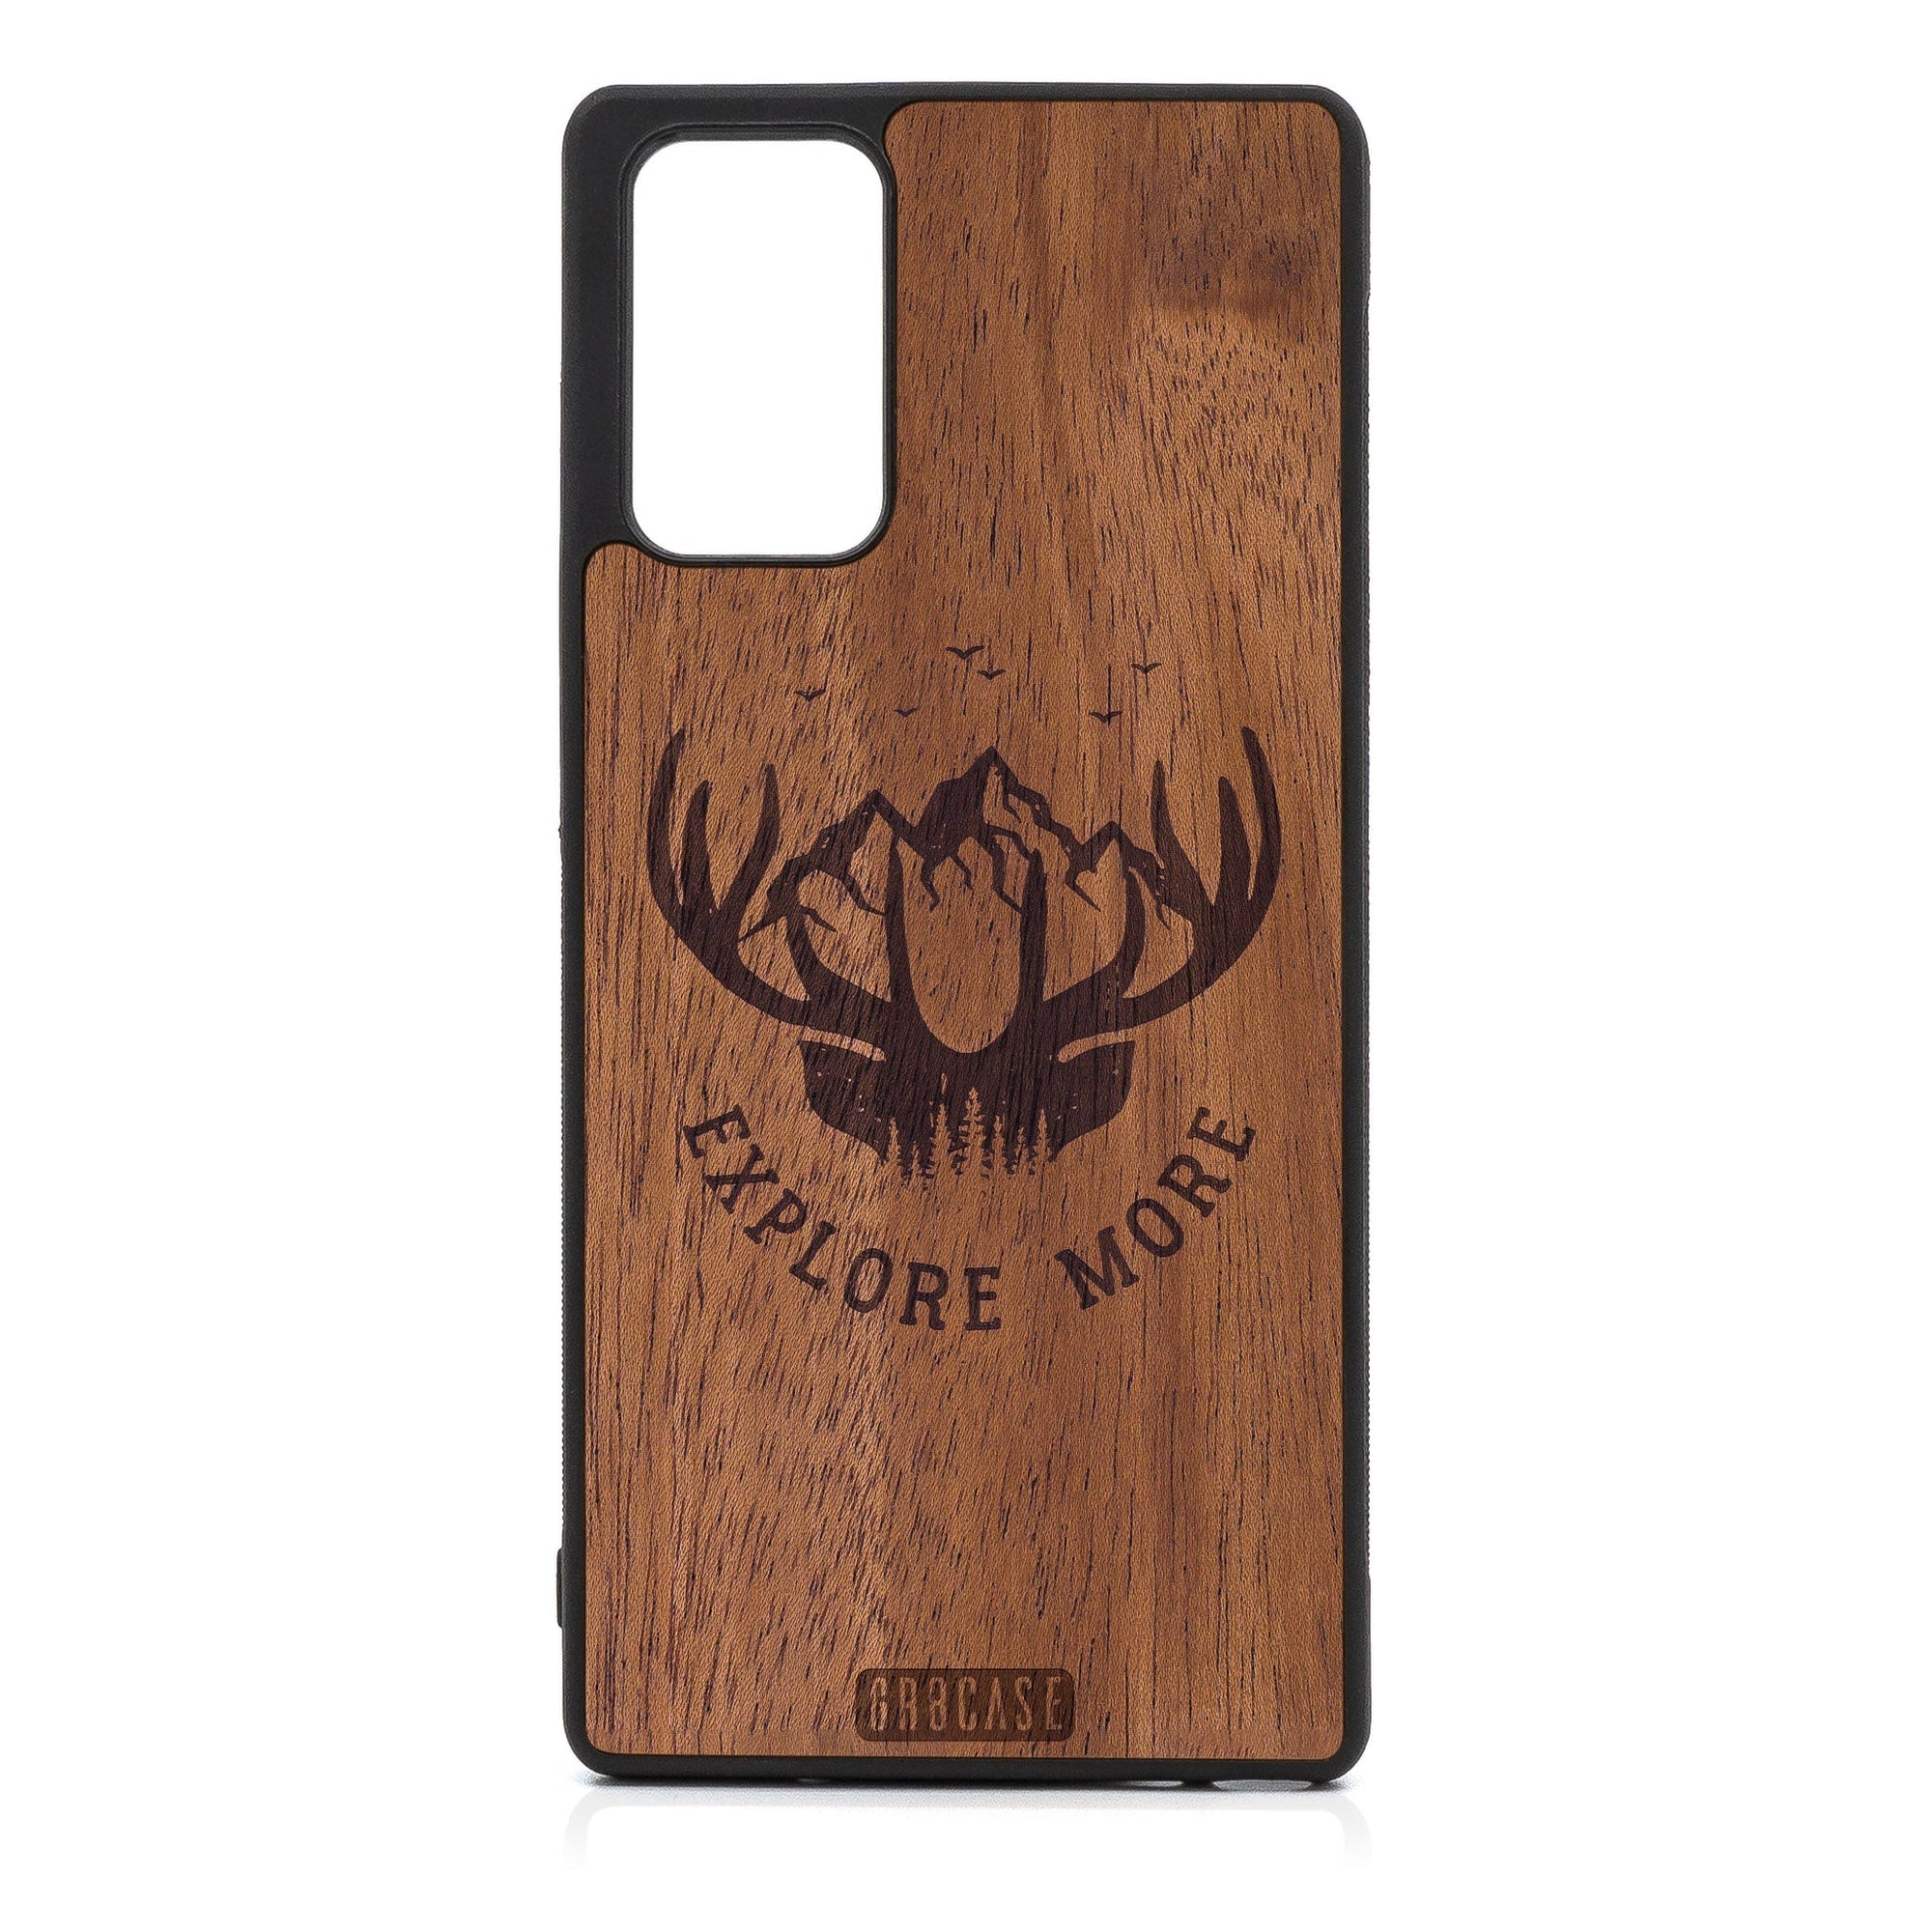 Explore More (Mountain & Antlers) Design Wood Case For Samsung Galaxy A72 5G